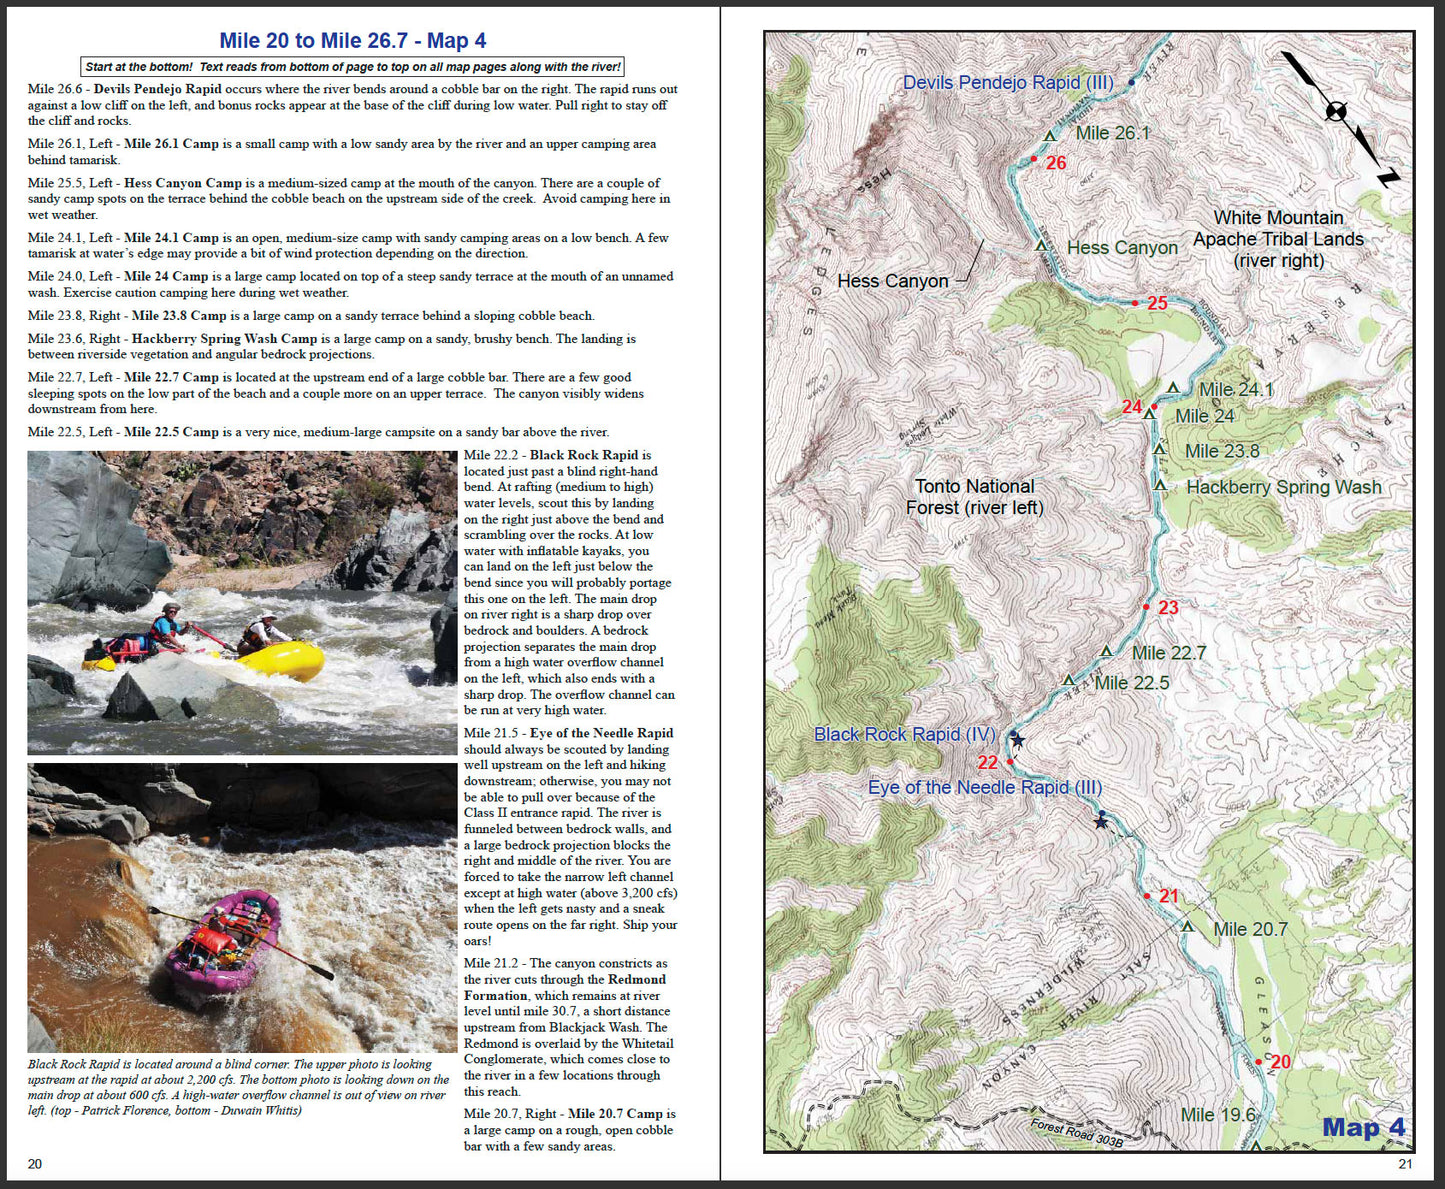 A waterproof Rivermaps map of the Upper Salt River with rafters using the Guide to the Upper Salt River in Arizona.